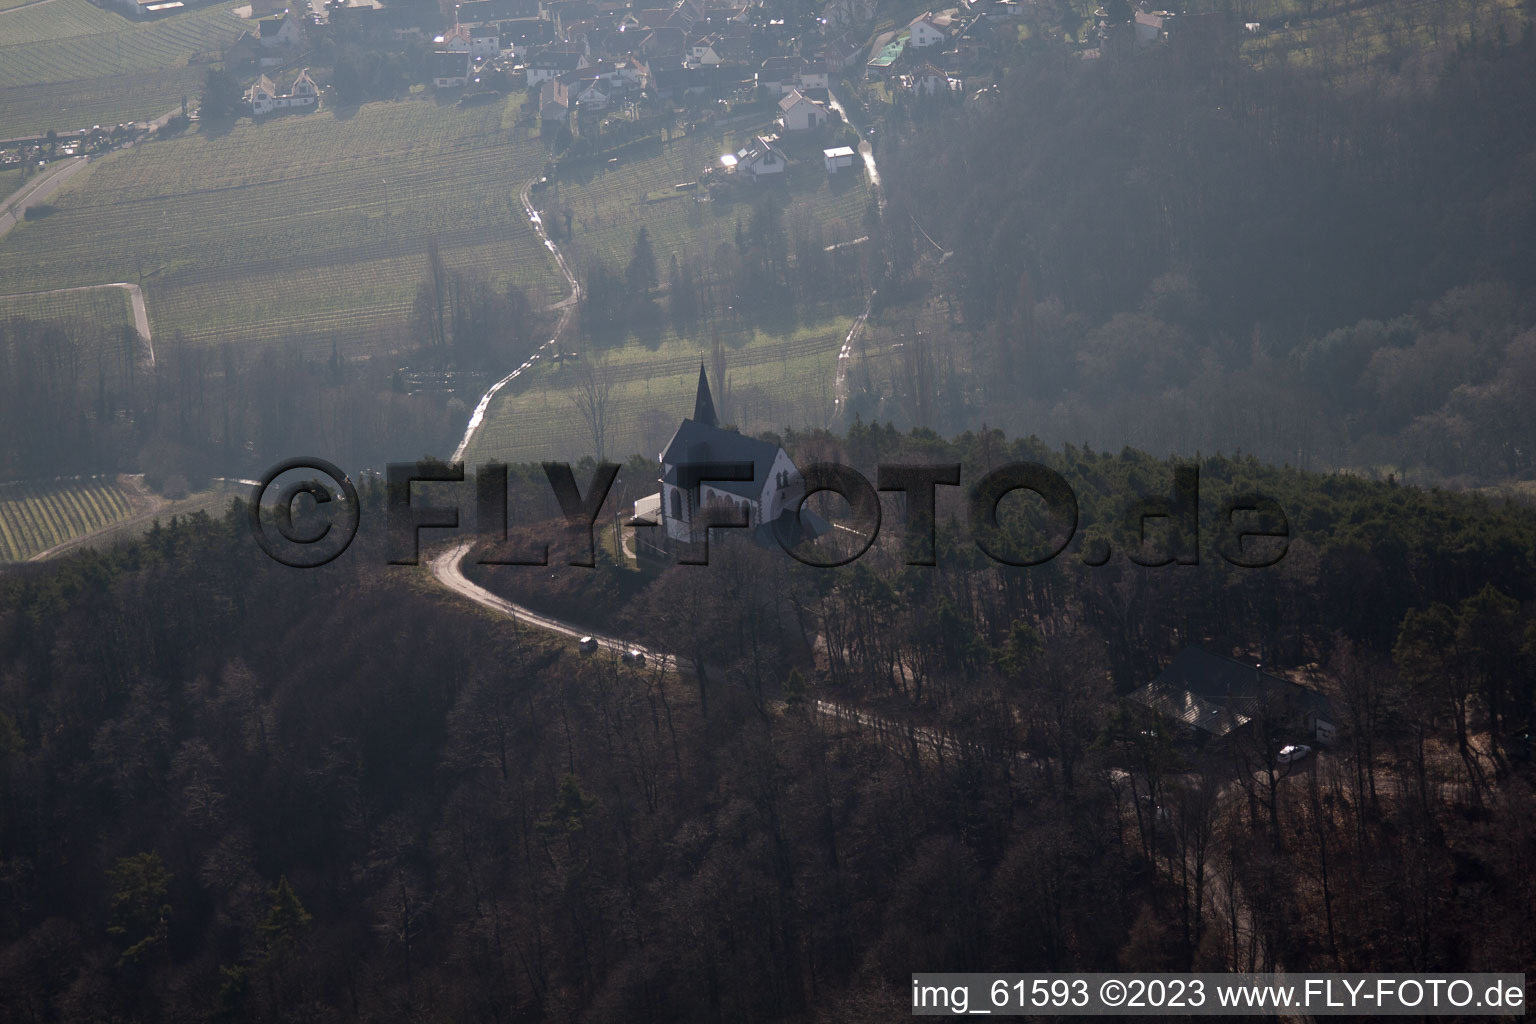 Anna Chapel in Burrweiler in the state Rhineland-Palatinate, Germany from above